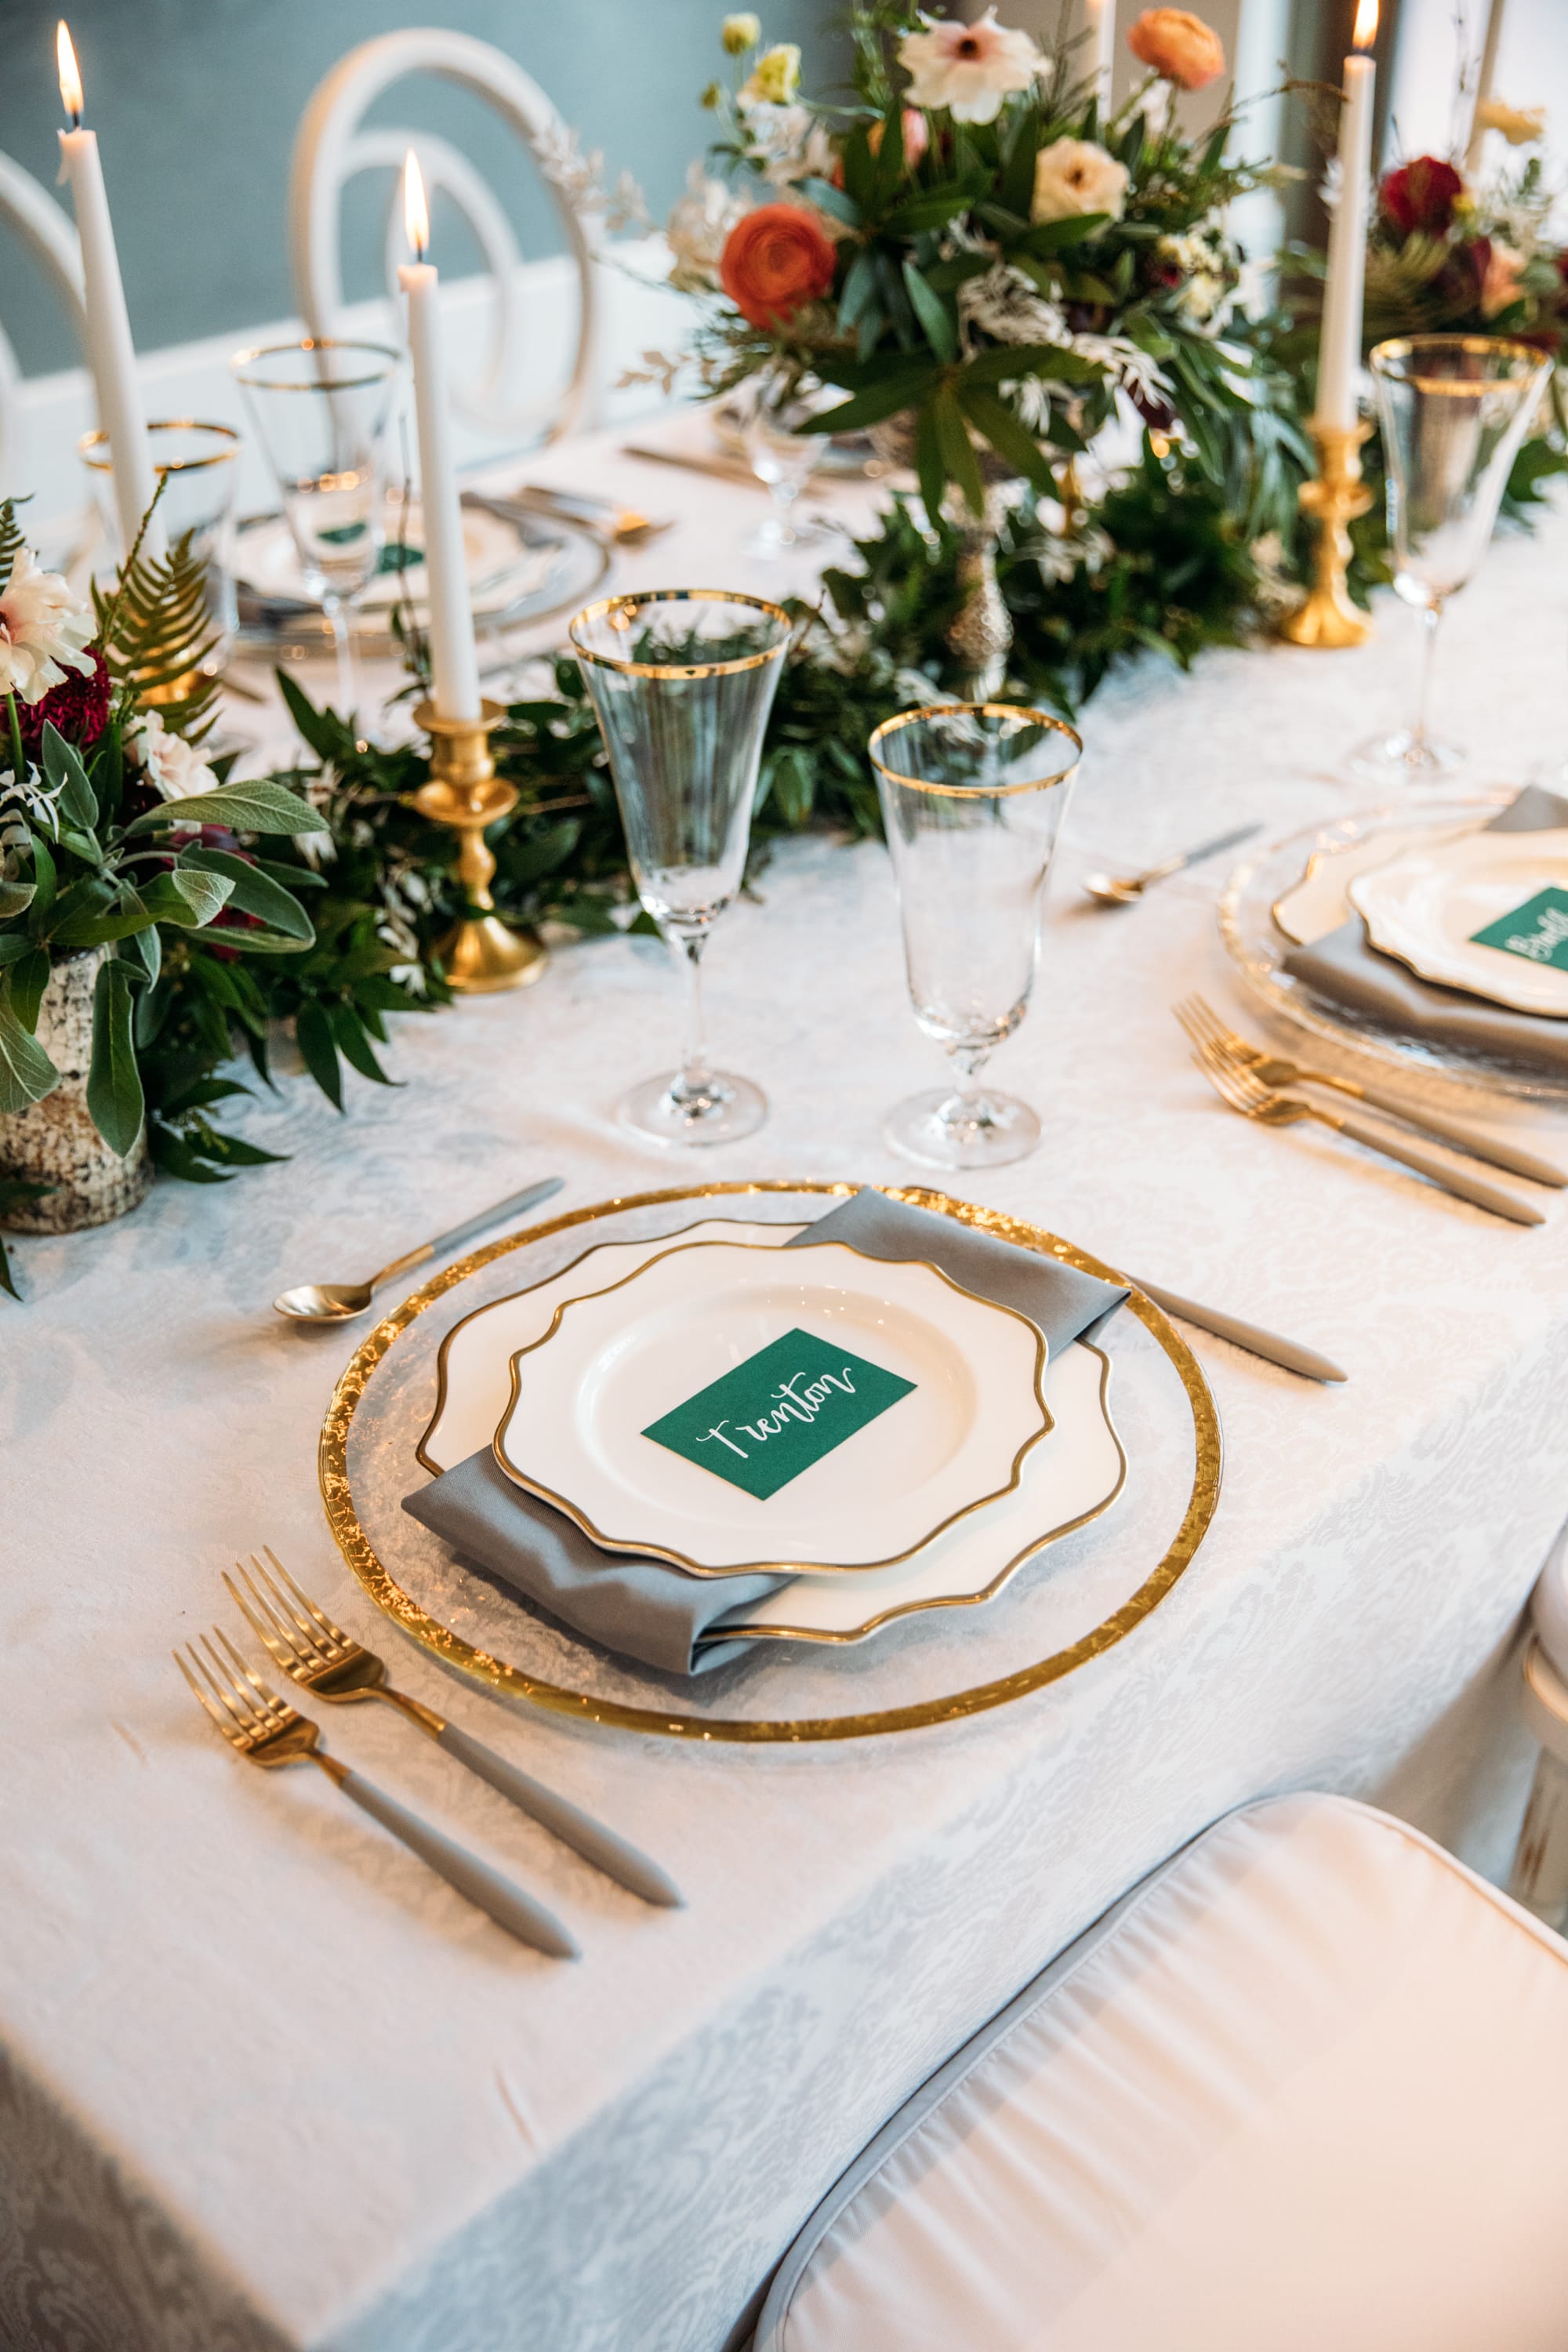 emerald wedding, wedding color inspiration, emerald and gold wedding, emerald and mustard wedding colors, gold silverware, elegant wedding tablescape, emerald wedding name tags, emerald name cards for table, white and gold candles